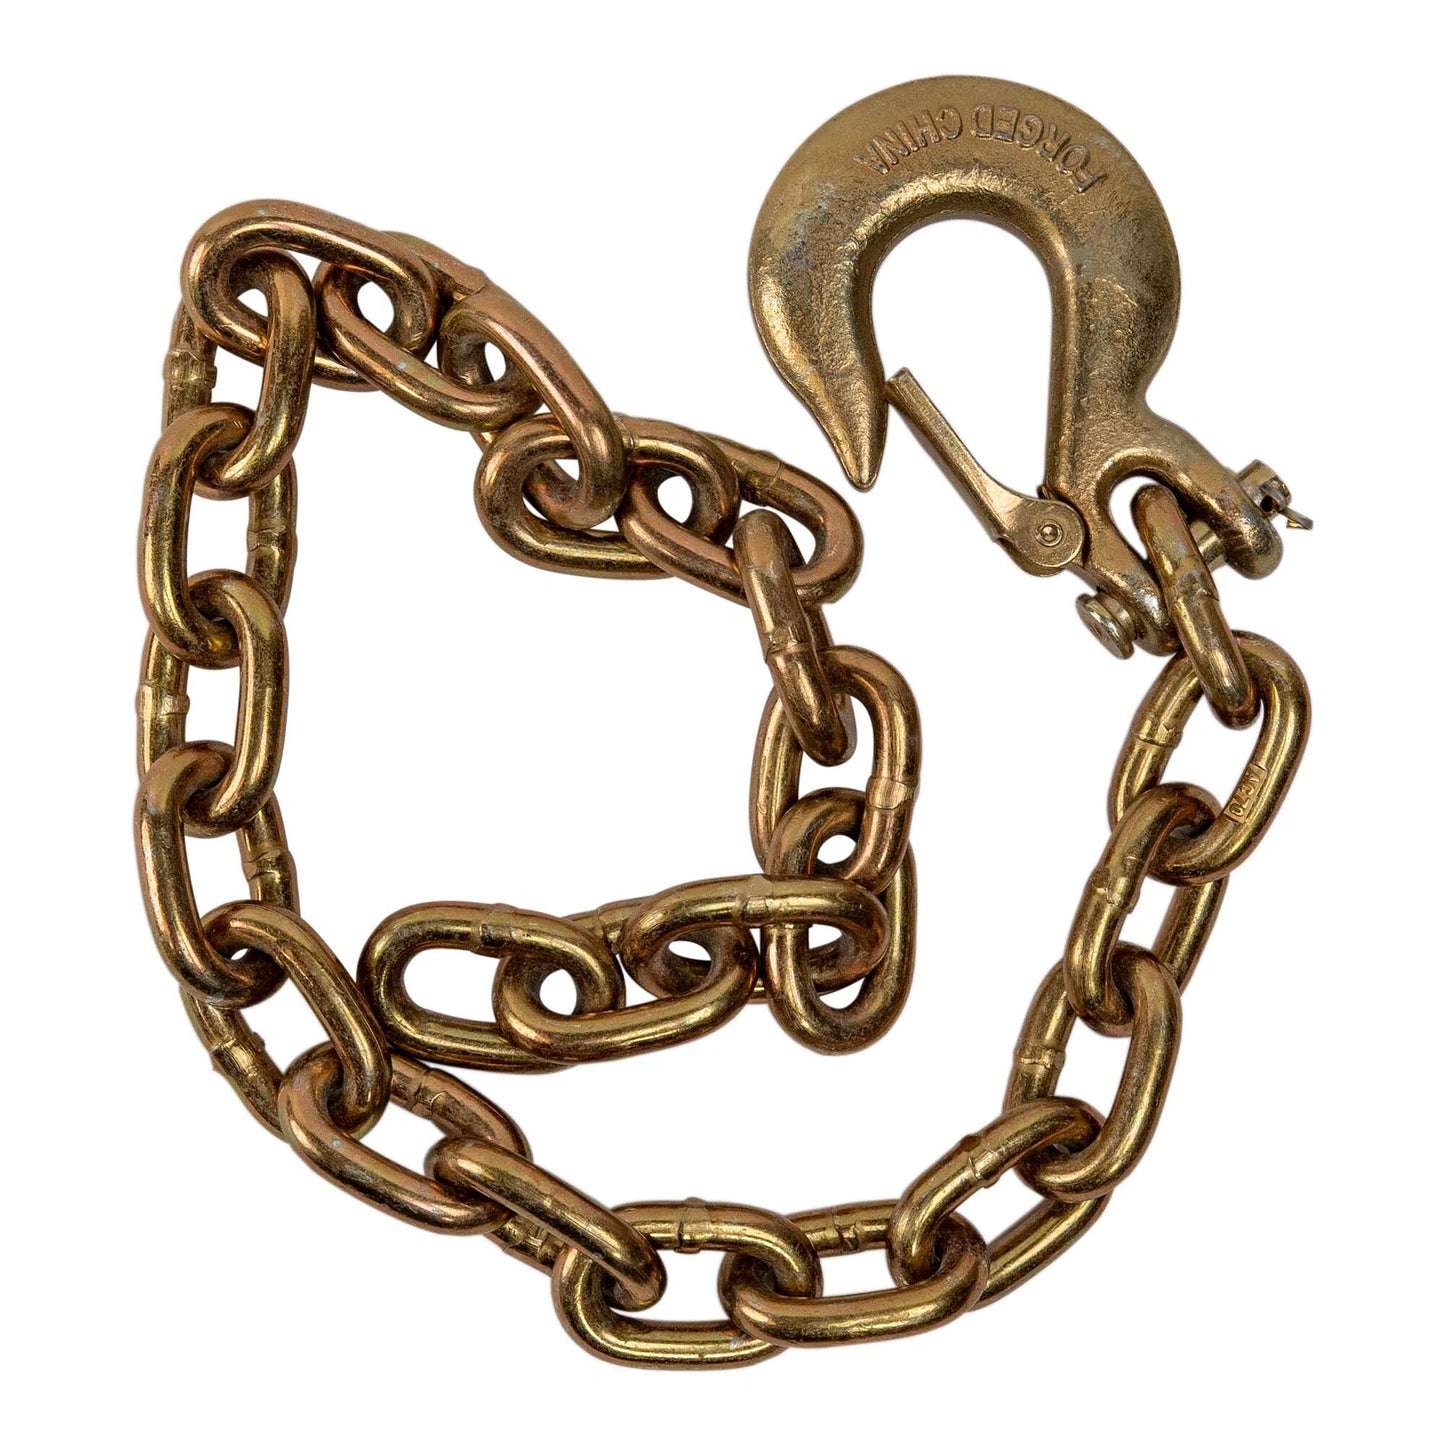 Gold Trailer Safety Chain - 3/8 x 39" with 1 Clevis Hook (27.4k Capacity)